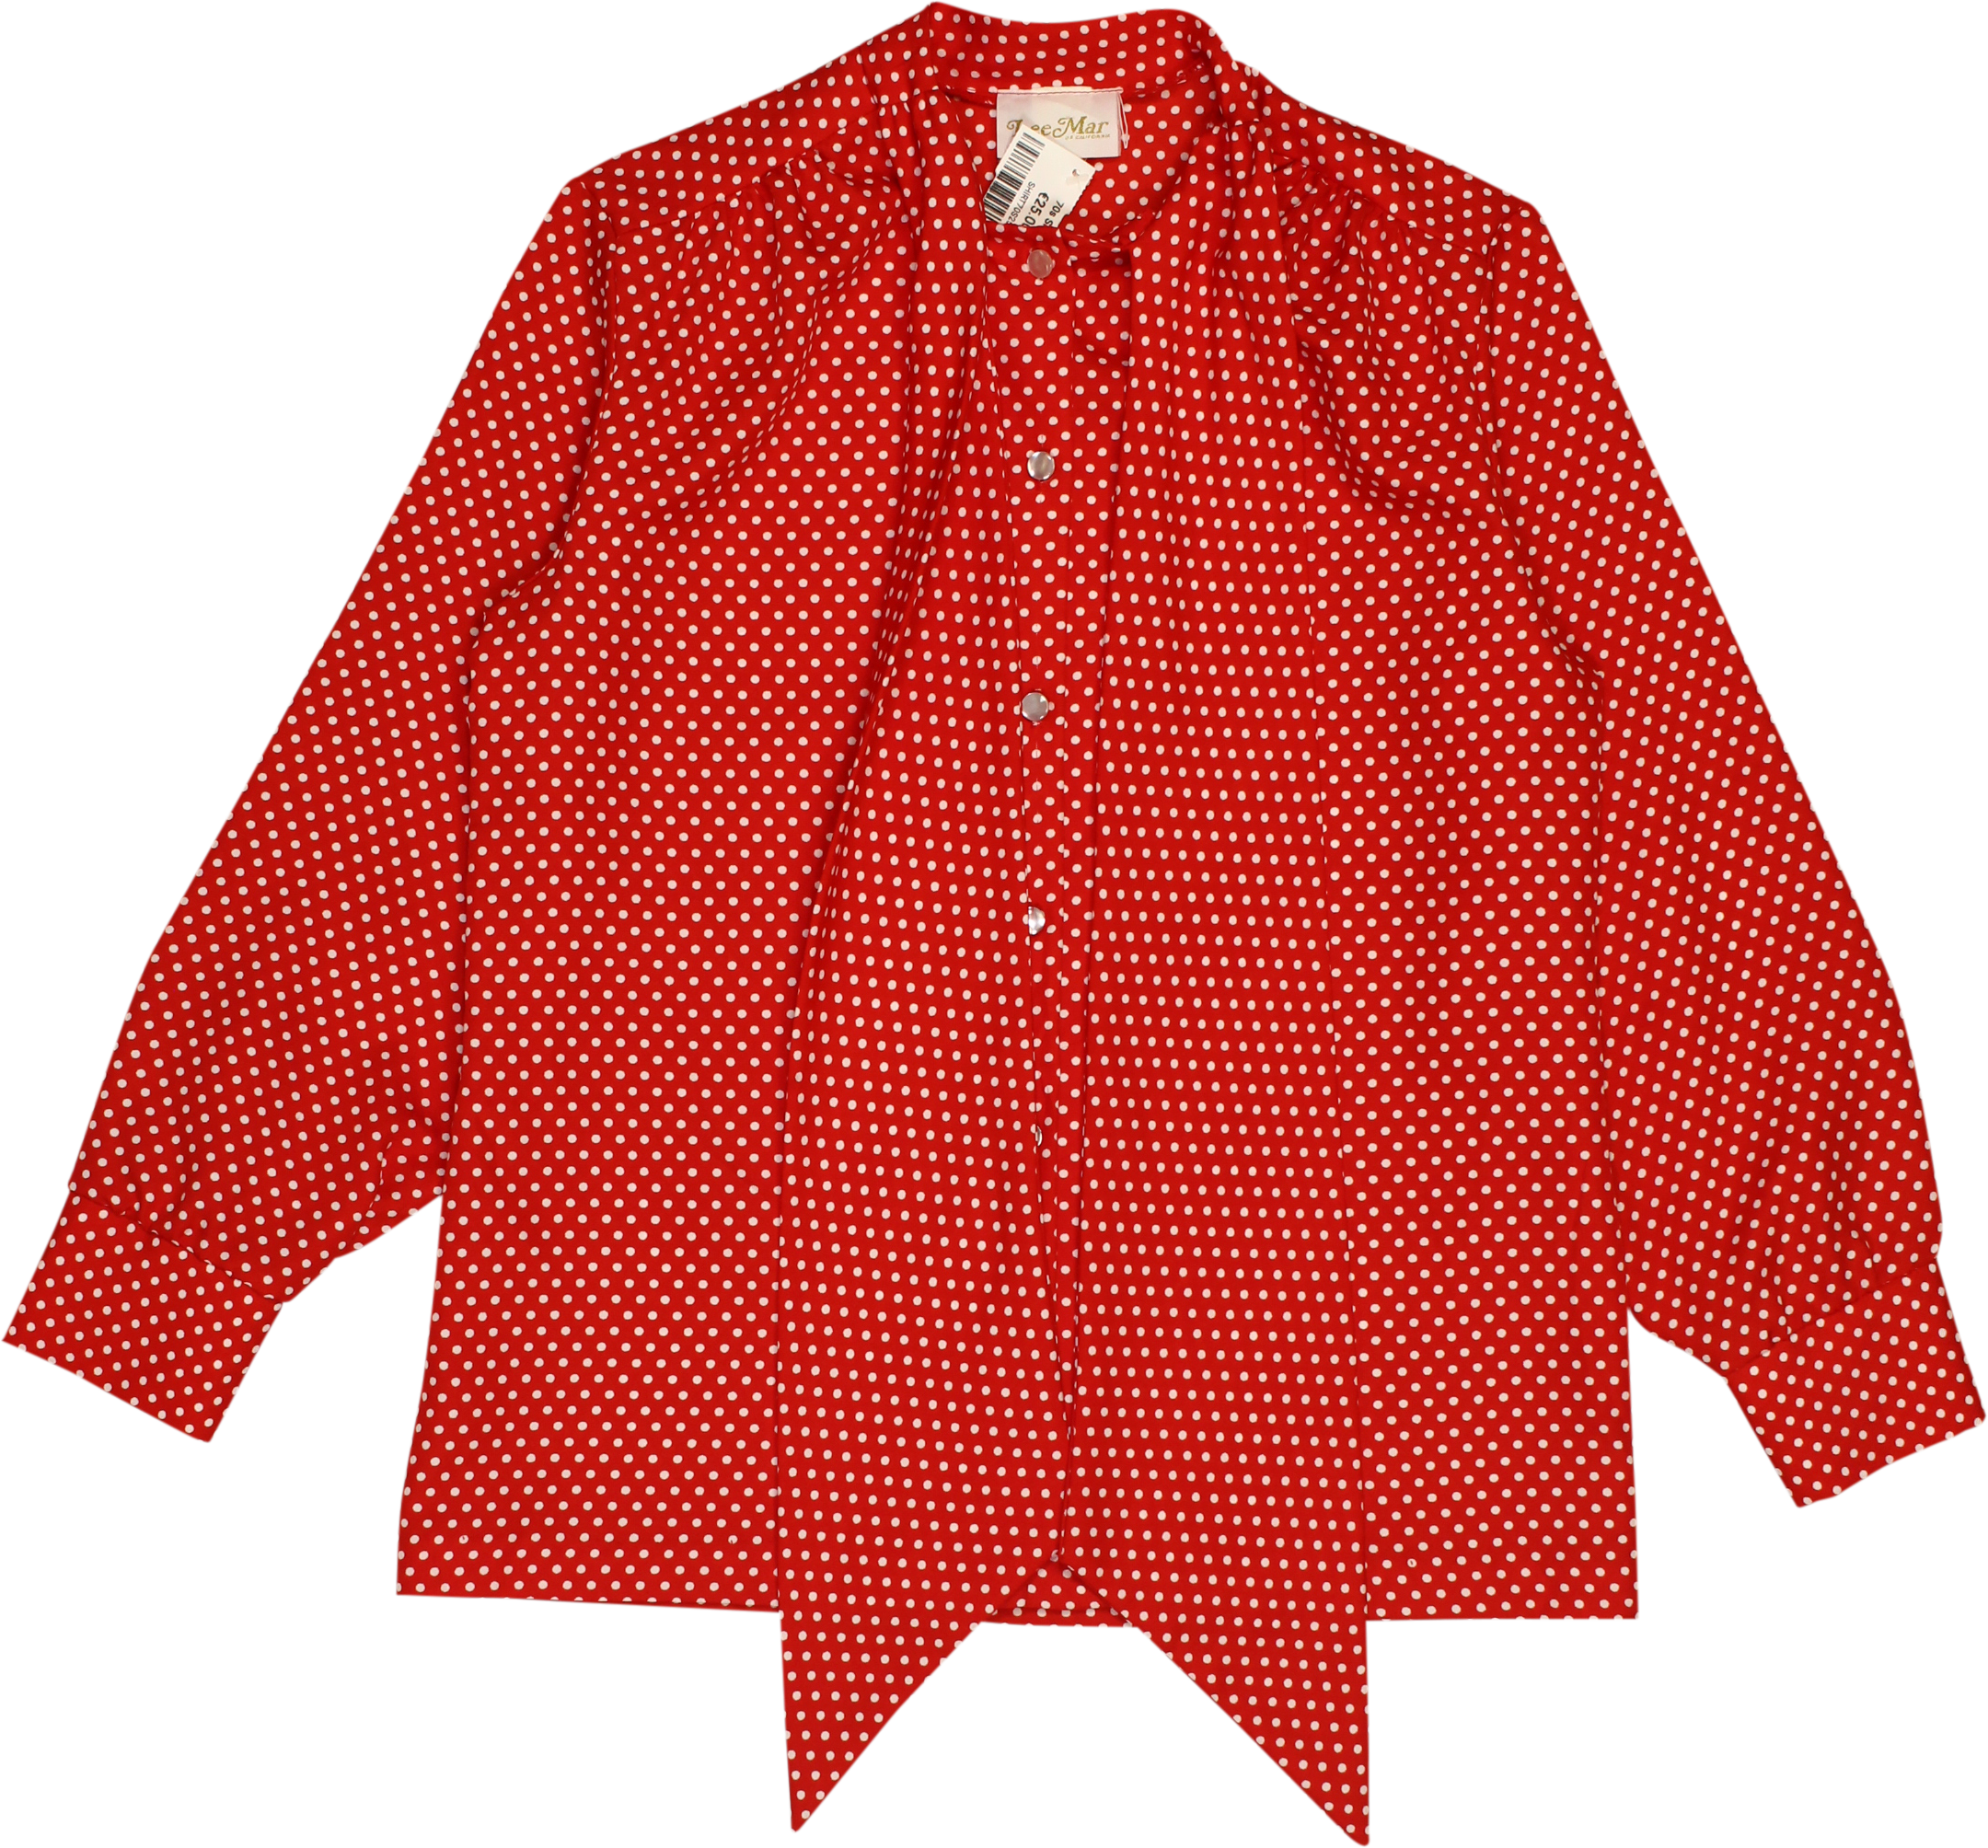 Lee Mar - 70's Polkadot Shirt- ThriftTale.com - Vintage and second handclothing